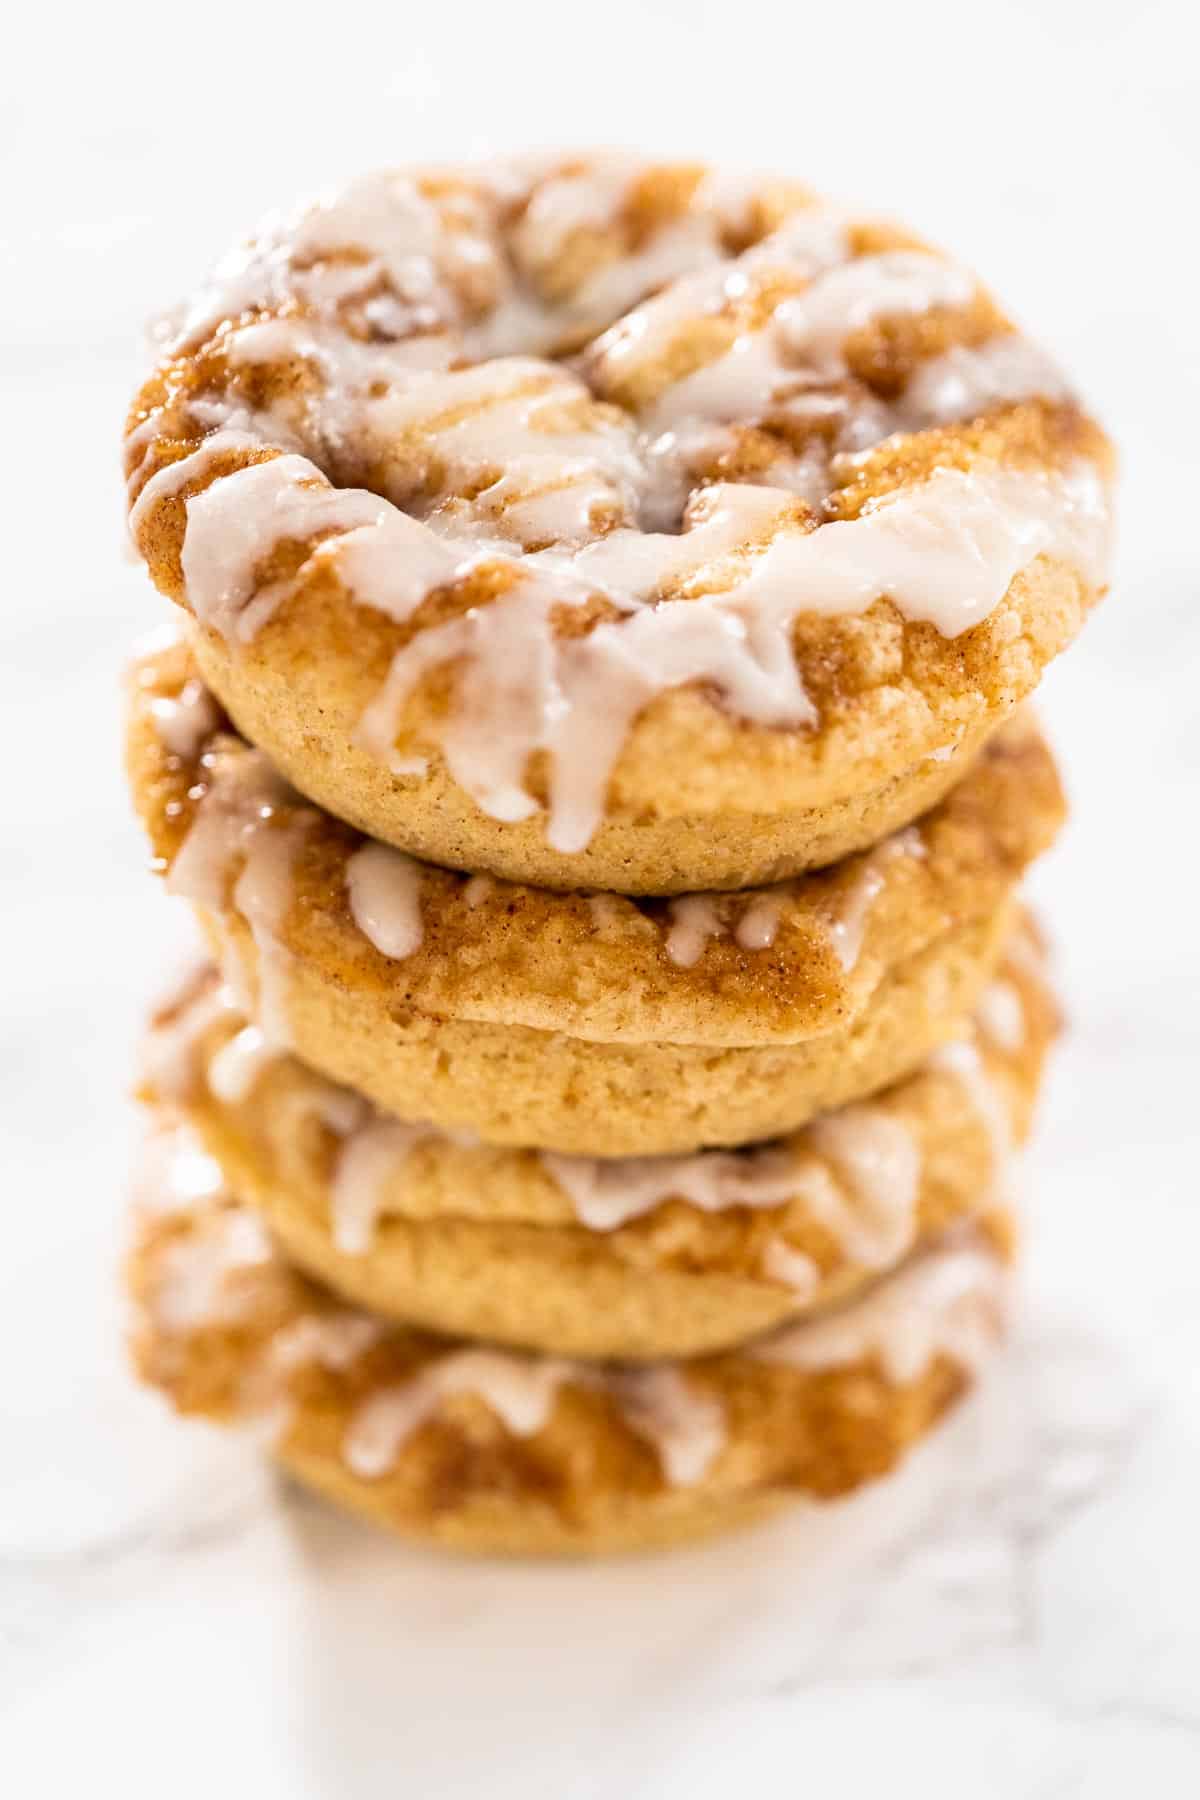 A stack of 4 cinnamon roll donuts with frosting.